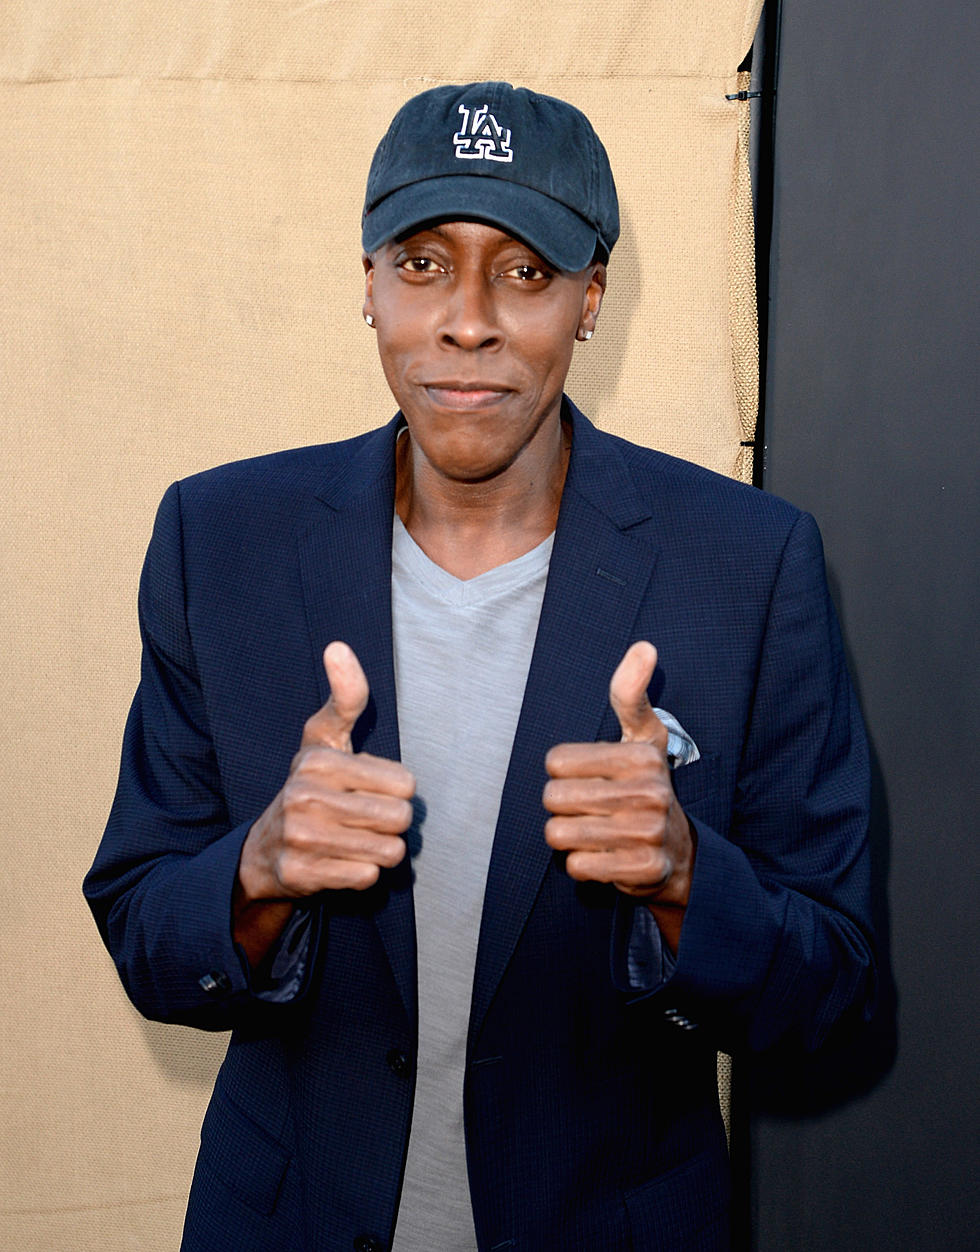 Arsenio Hall Claims David Letterman Wanted Him for Replacement [Video]